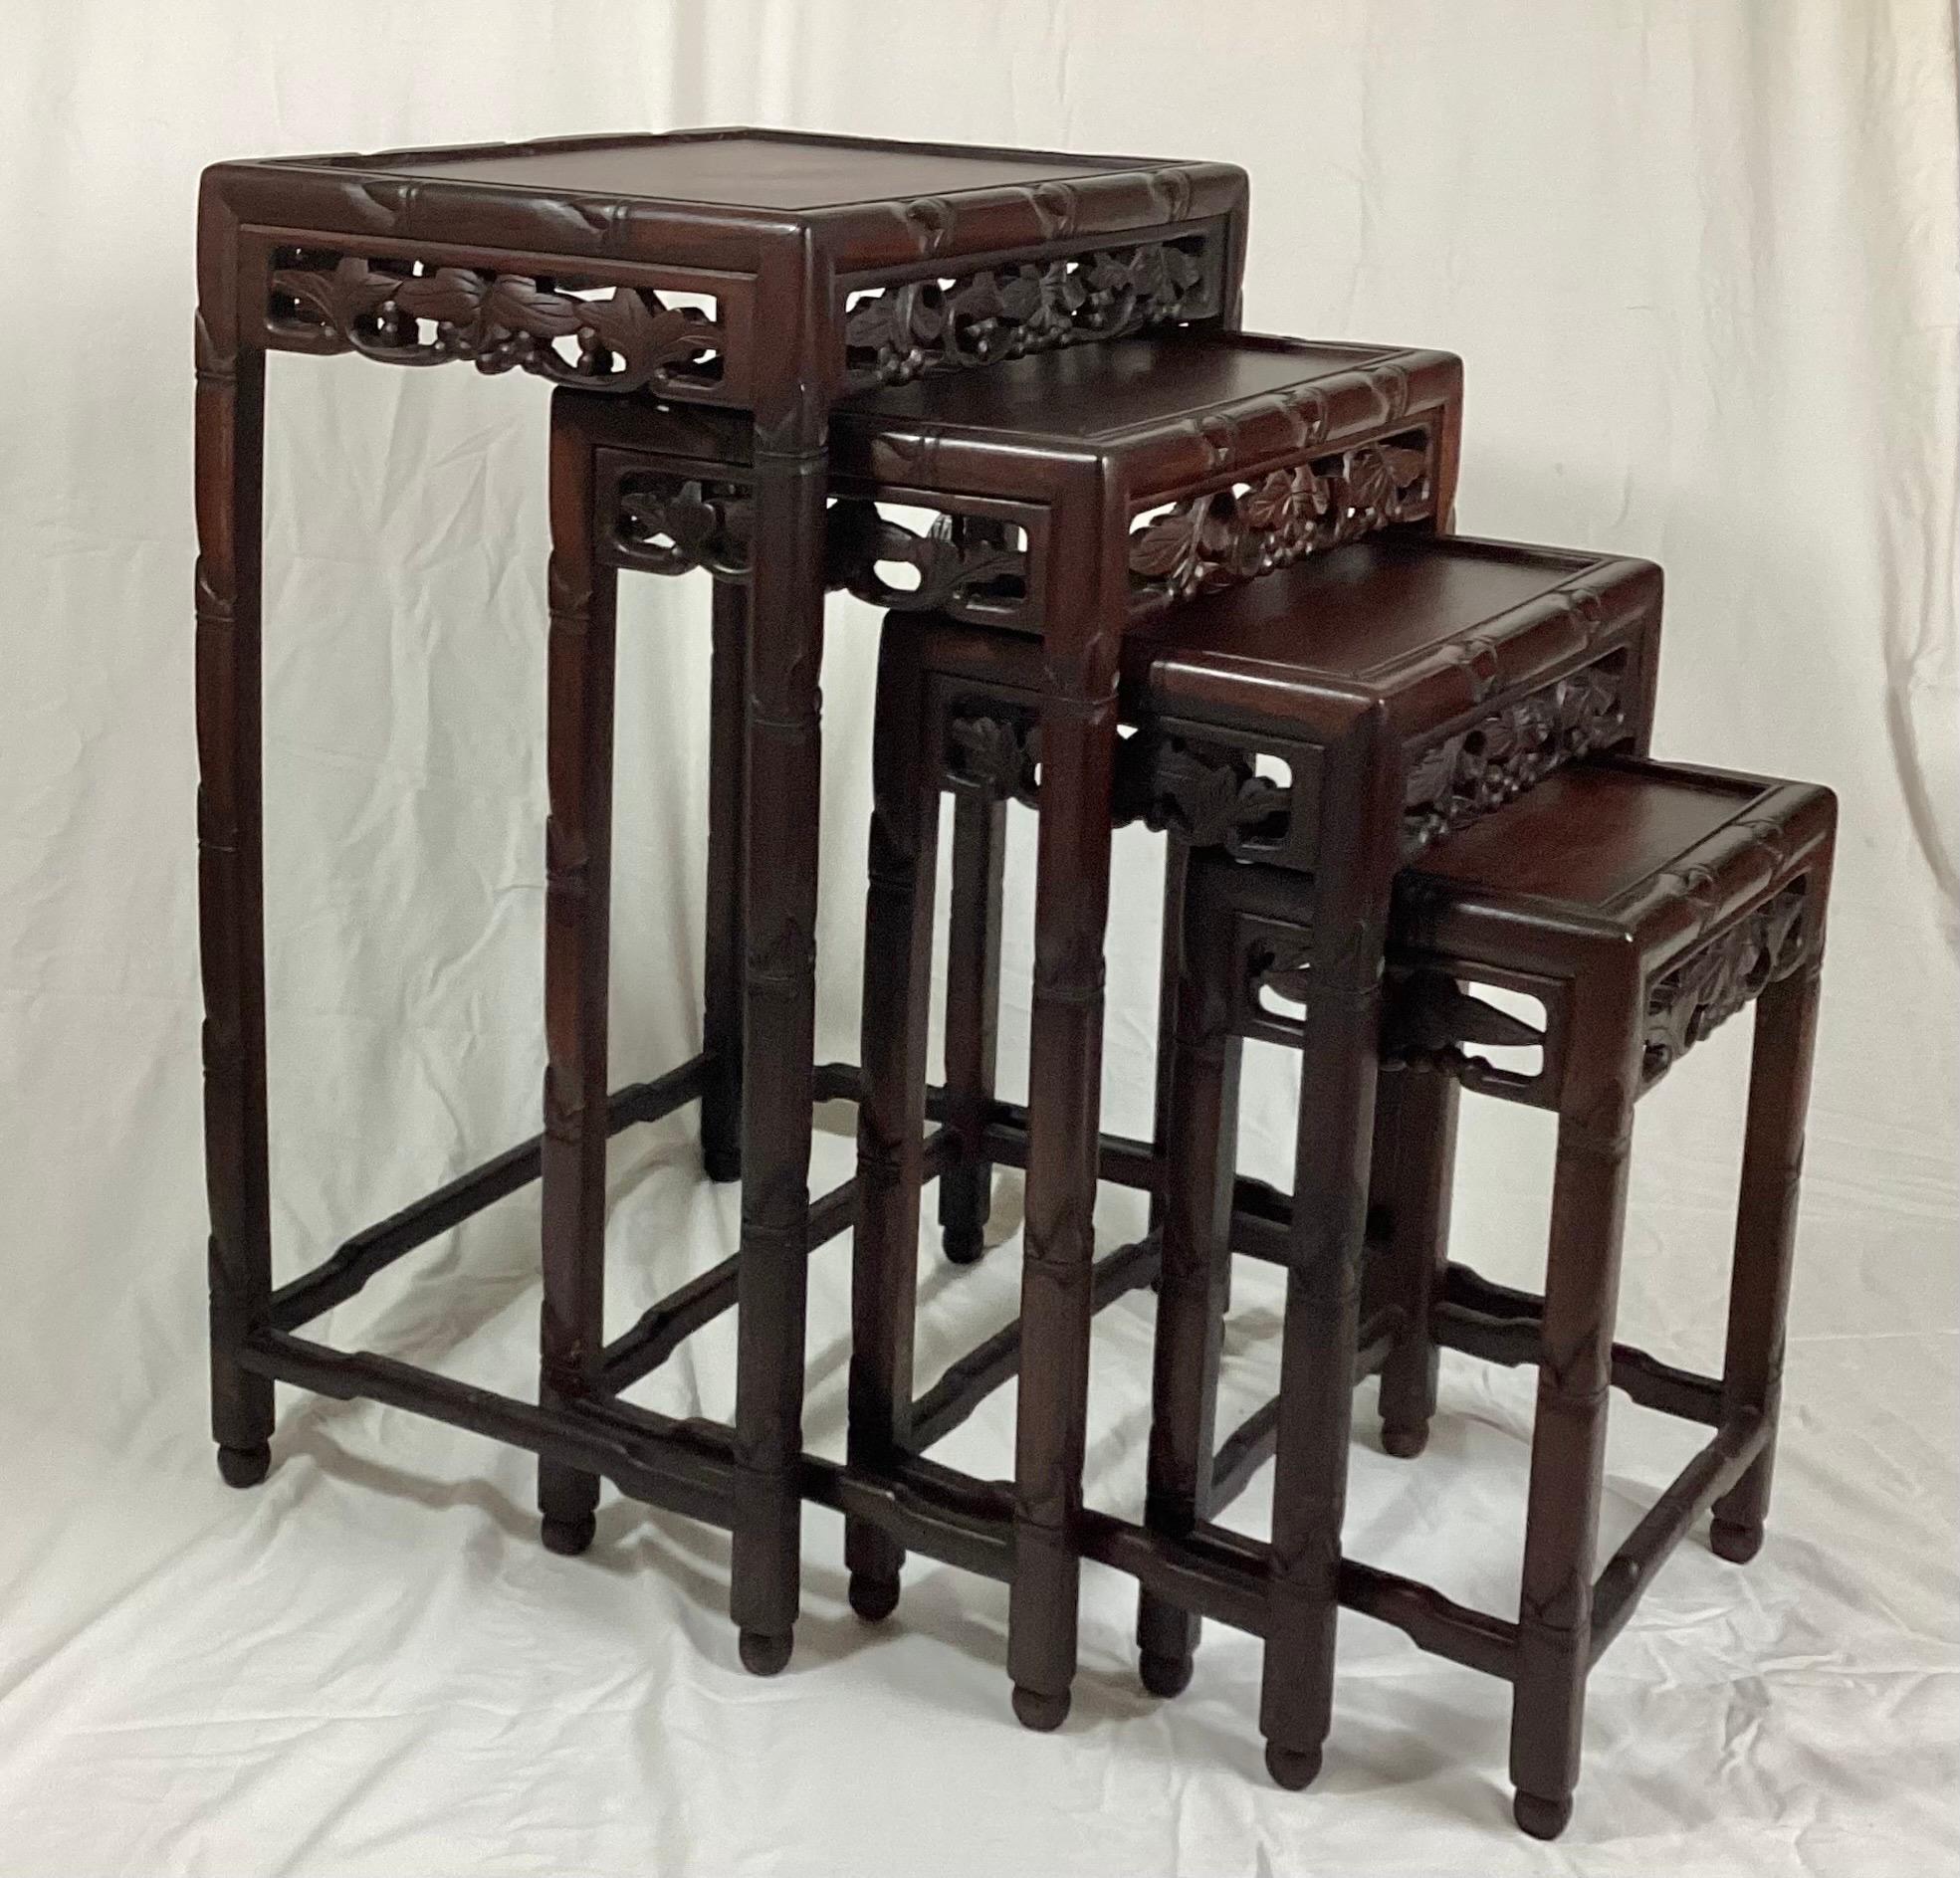 Chinese Rosewood set of 4 nesting tables with carved Frieze Decoration. The largest is 14